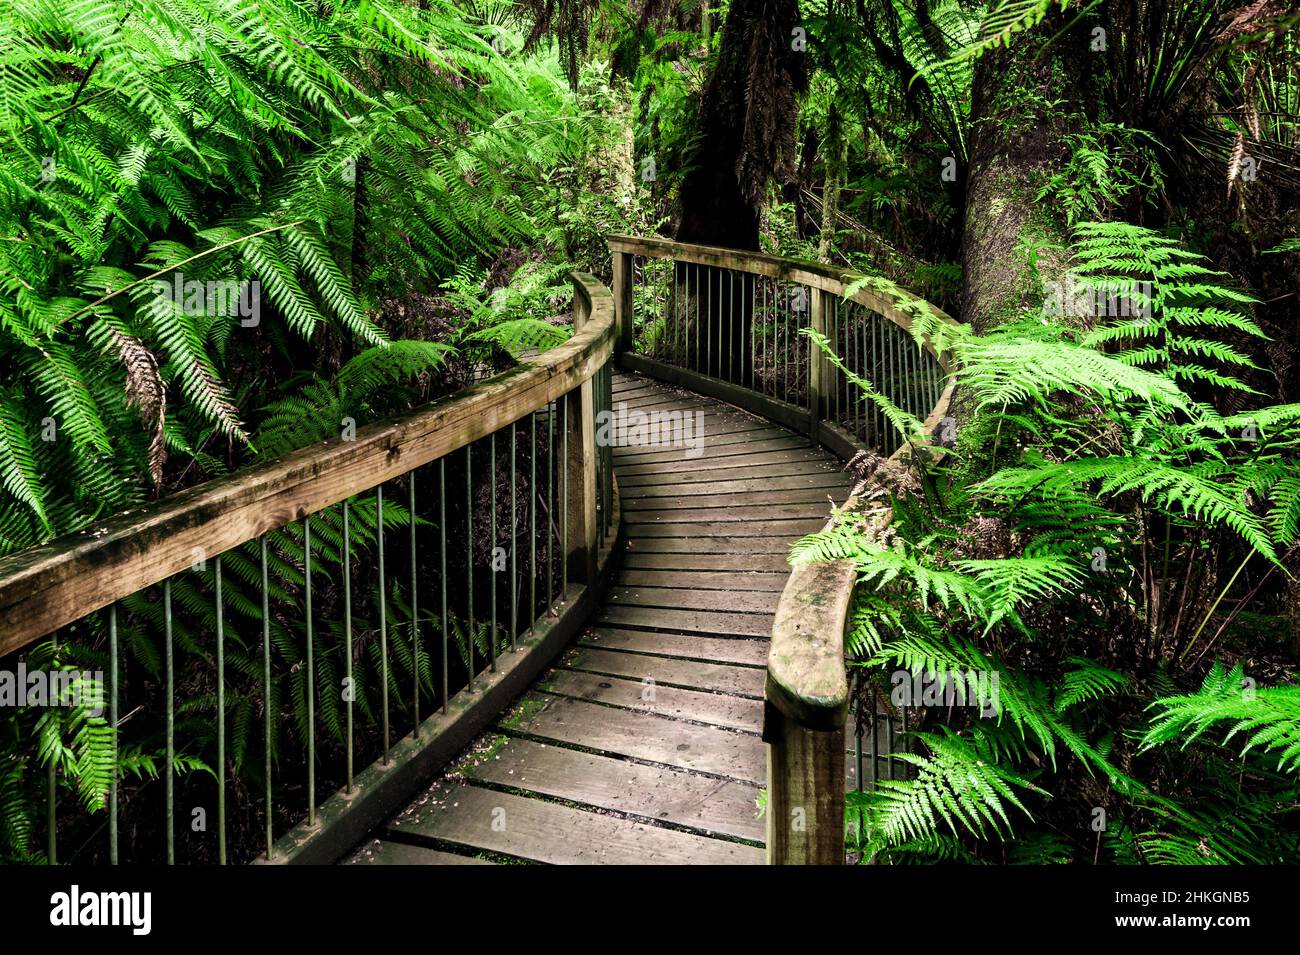 Famous walk through temperate rainforest at Maits Rest in Great Otway National Park. Stock Photo